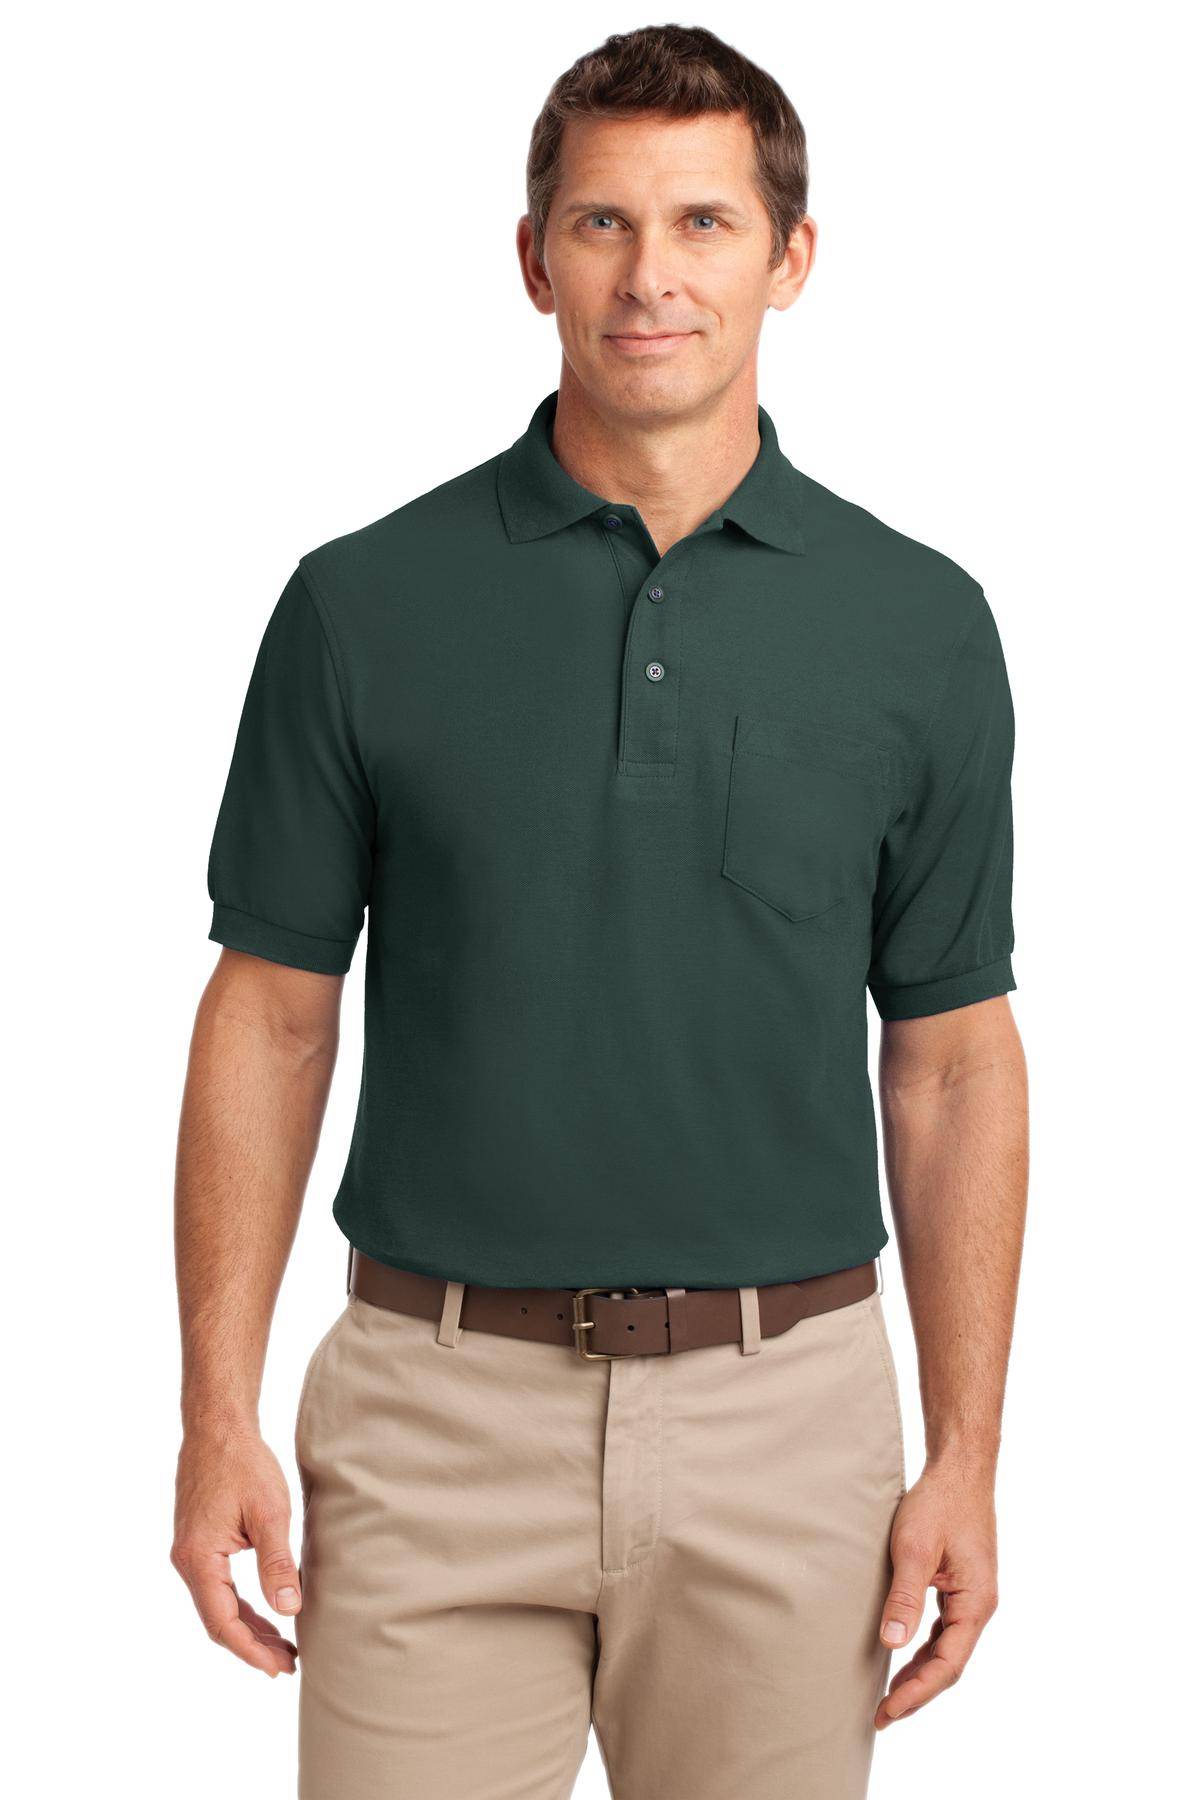 Port Authority K500P Mens Short Sleeve Three Button Silk Touch Polo Shirt With Pocket